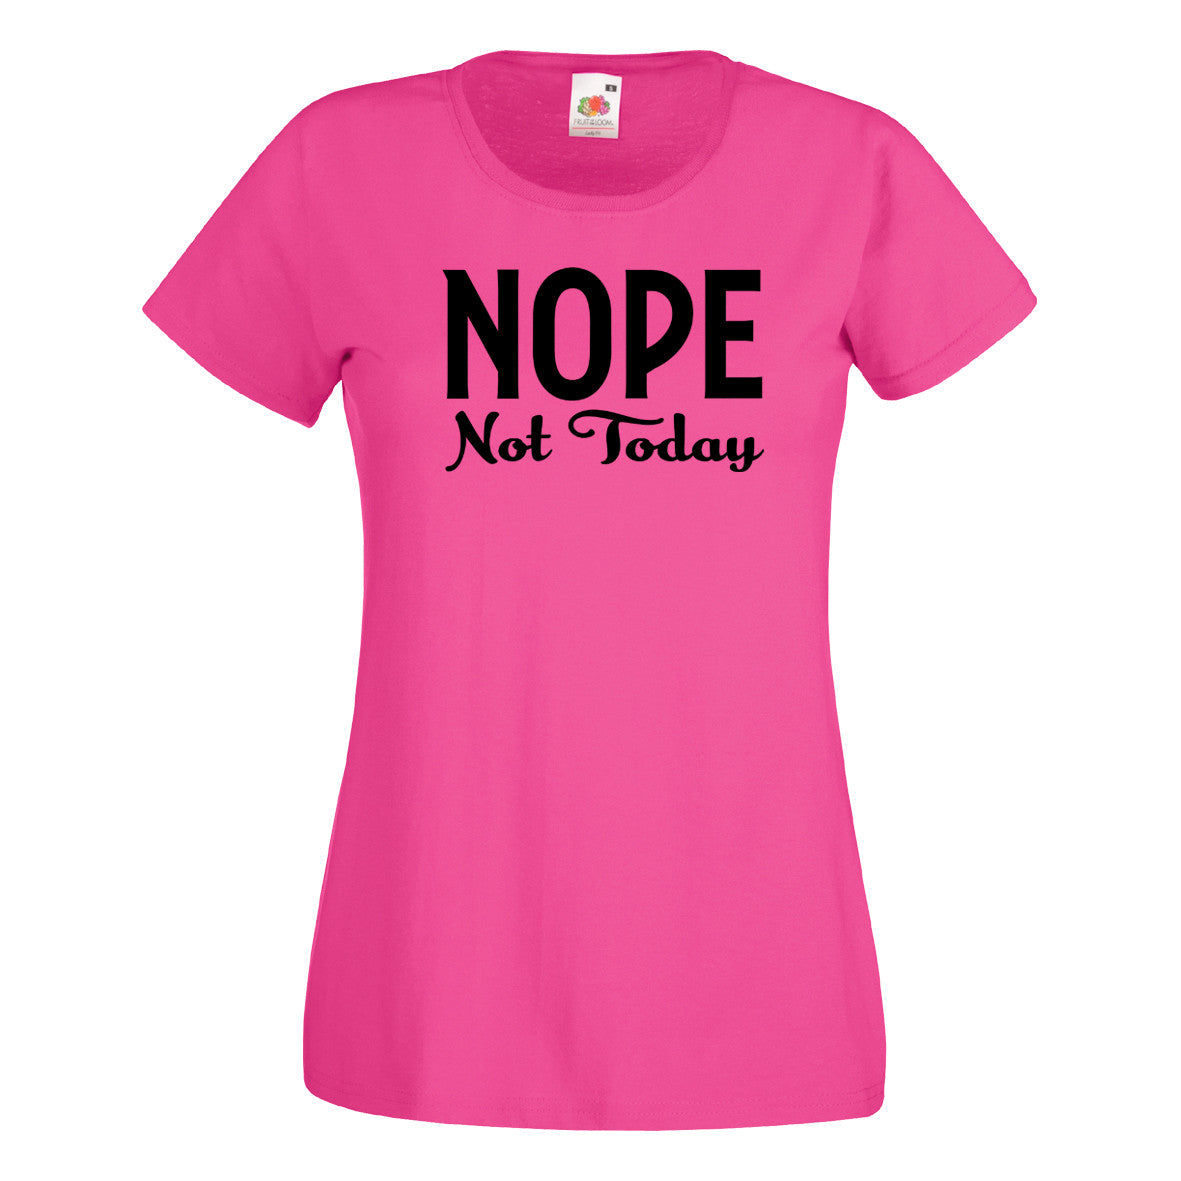 Nope Not Today – CENTRAL T-SHIRTS